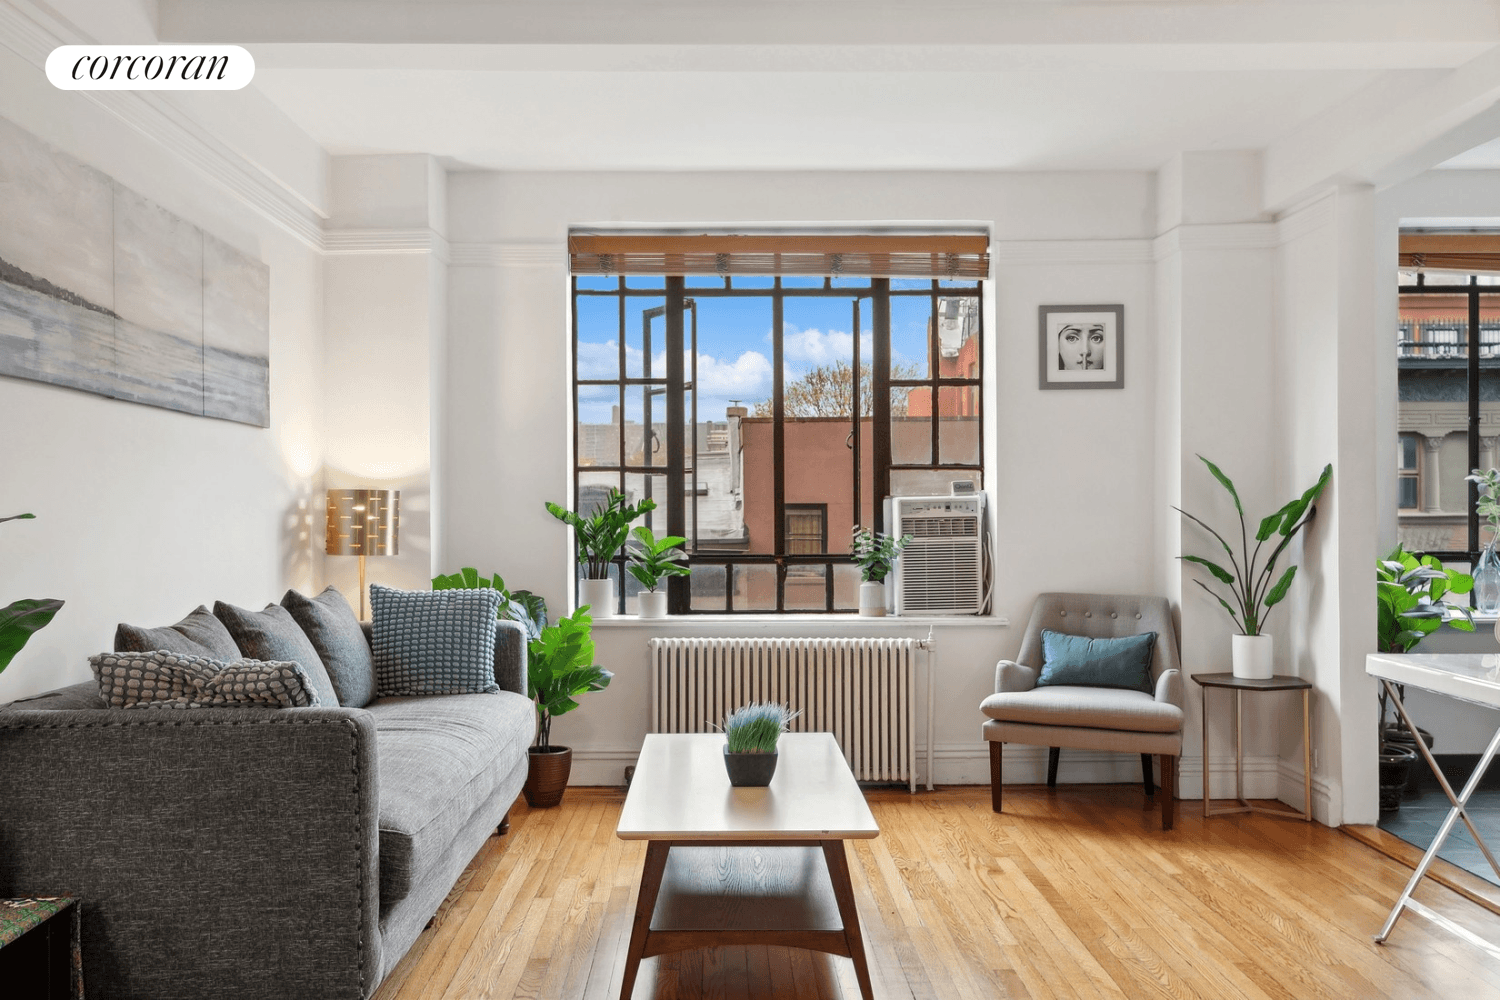 Welcome to 101 Lafayette 6i a recently renovated, extra large, luxury studio apartment located in the lovely neighborhood of Fort Greene, Brooklyn.